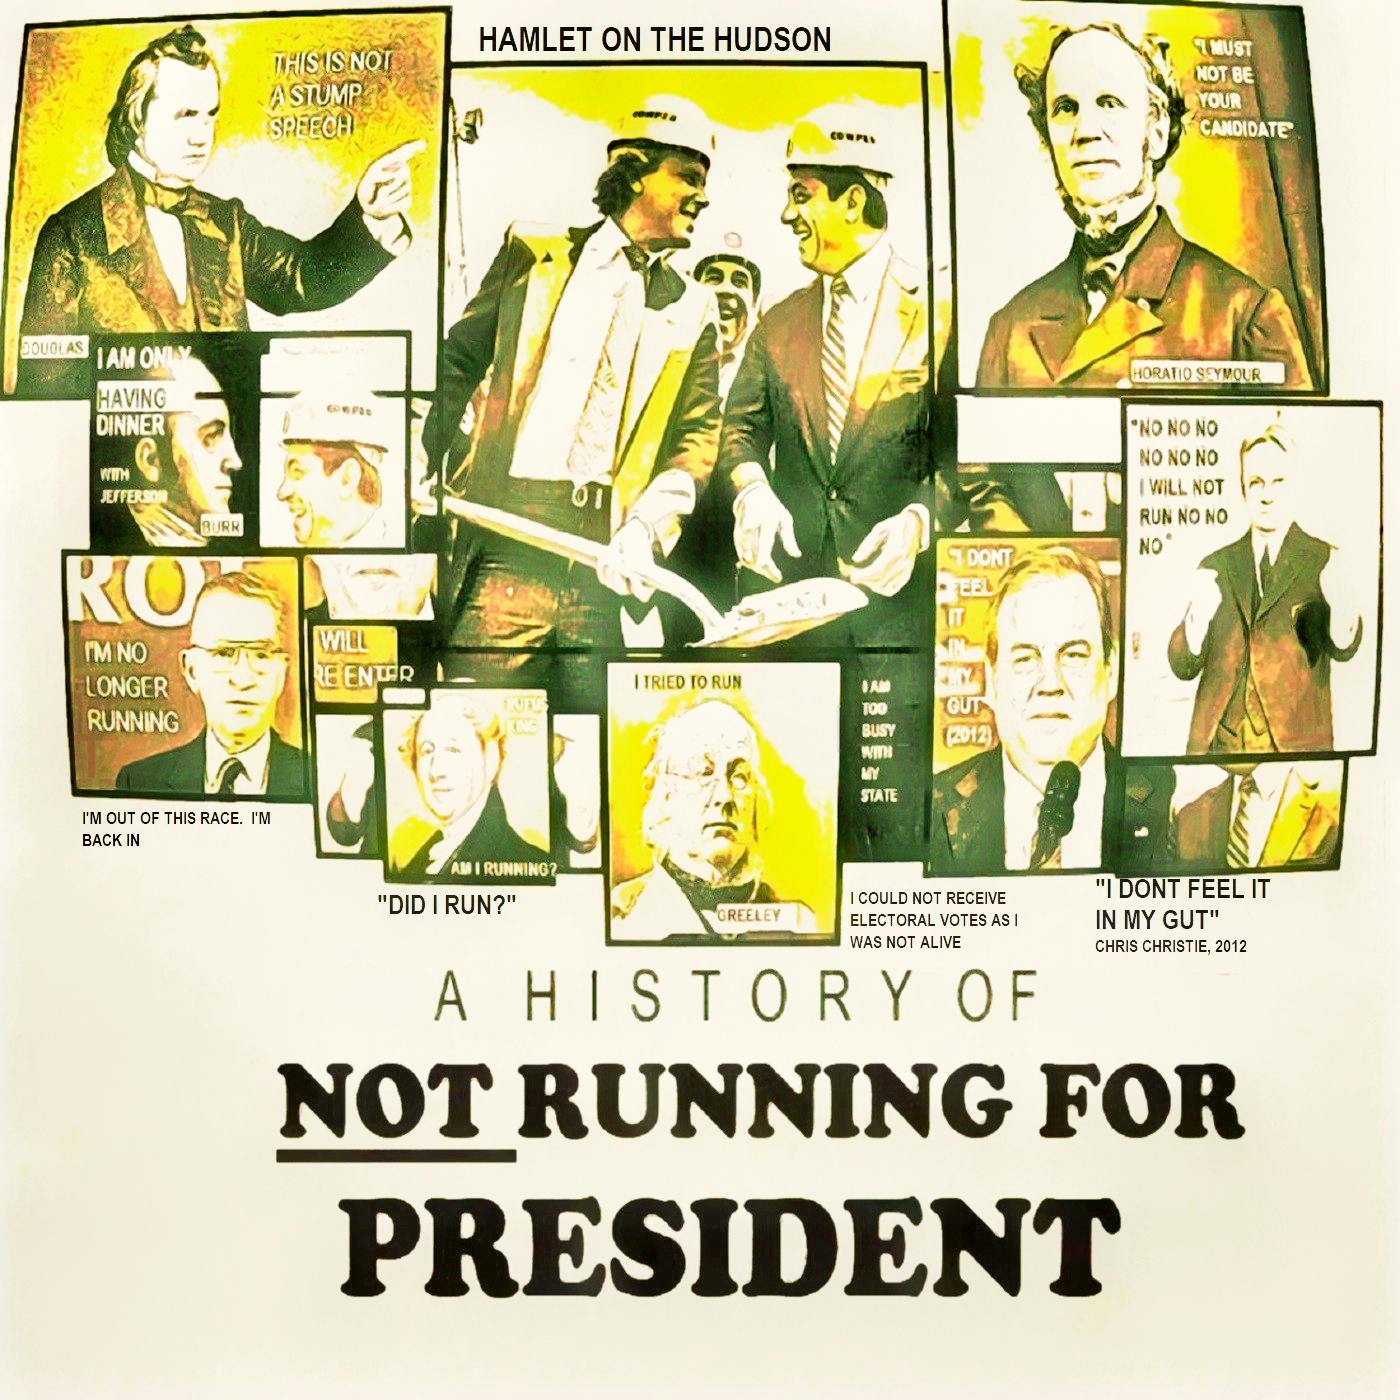 NOT RUNNING FOR PRESIDENT: Part One - Horatio Seymour, Horace Greeley and Others